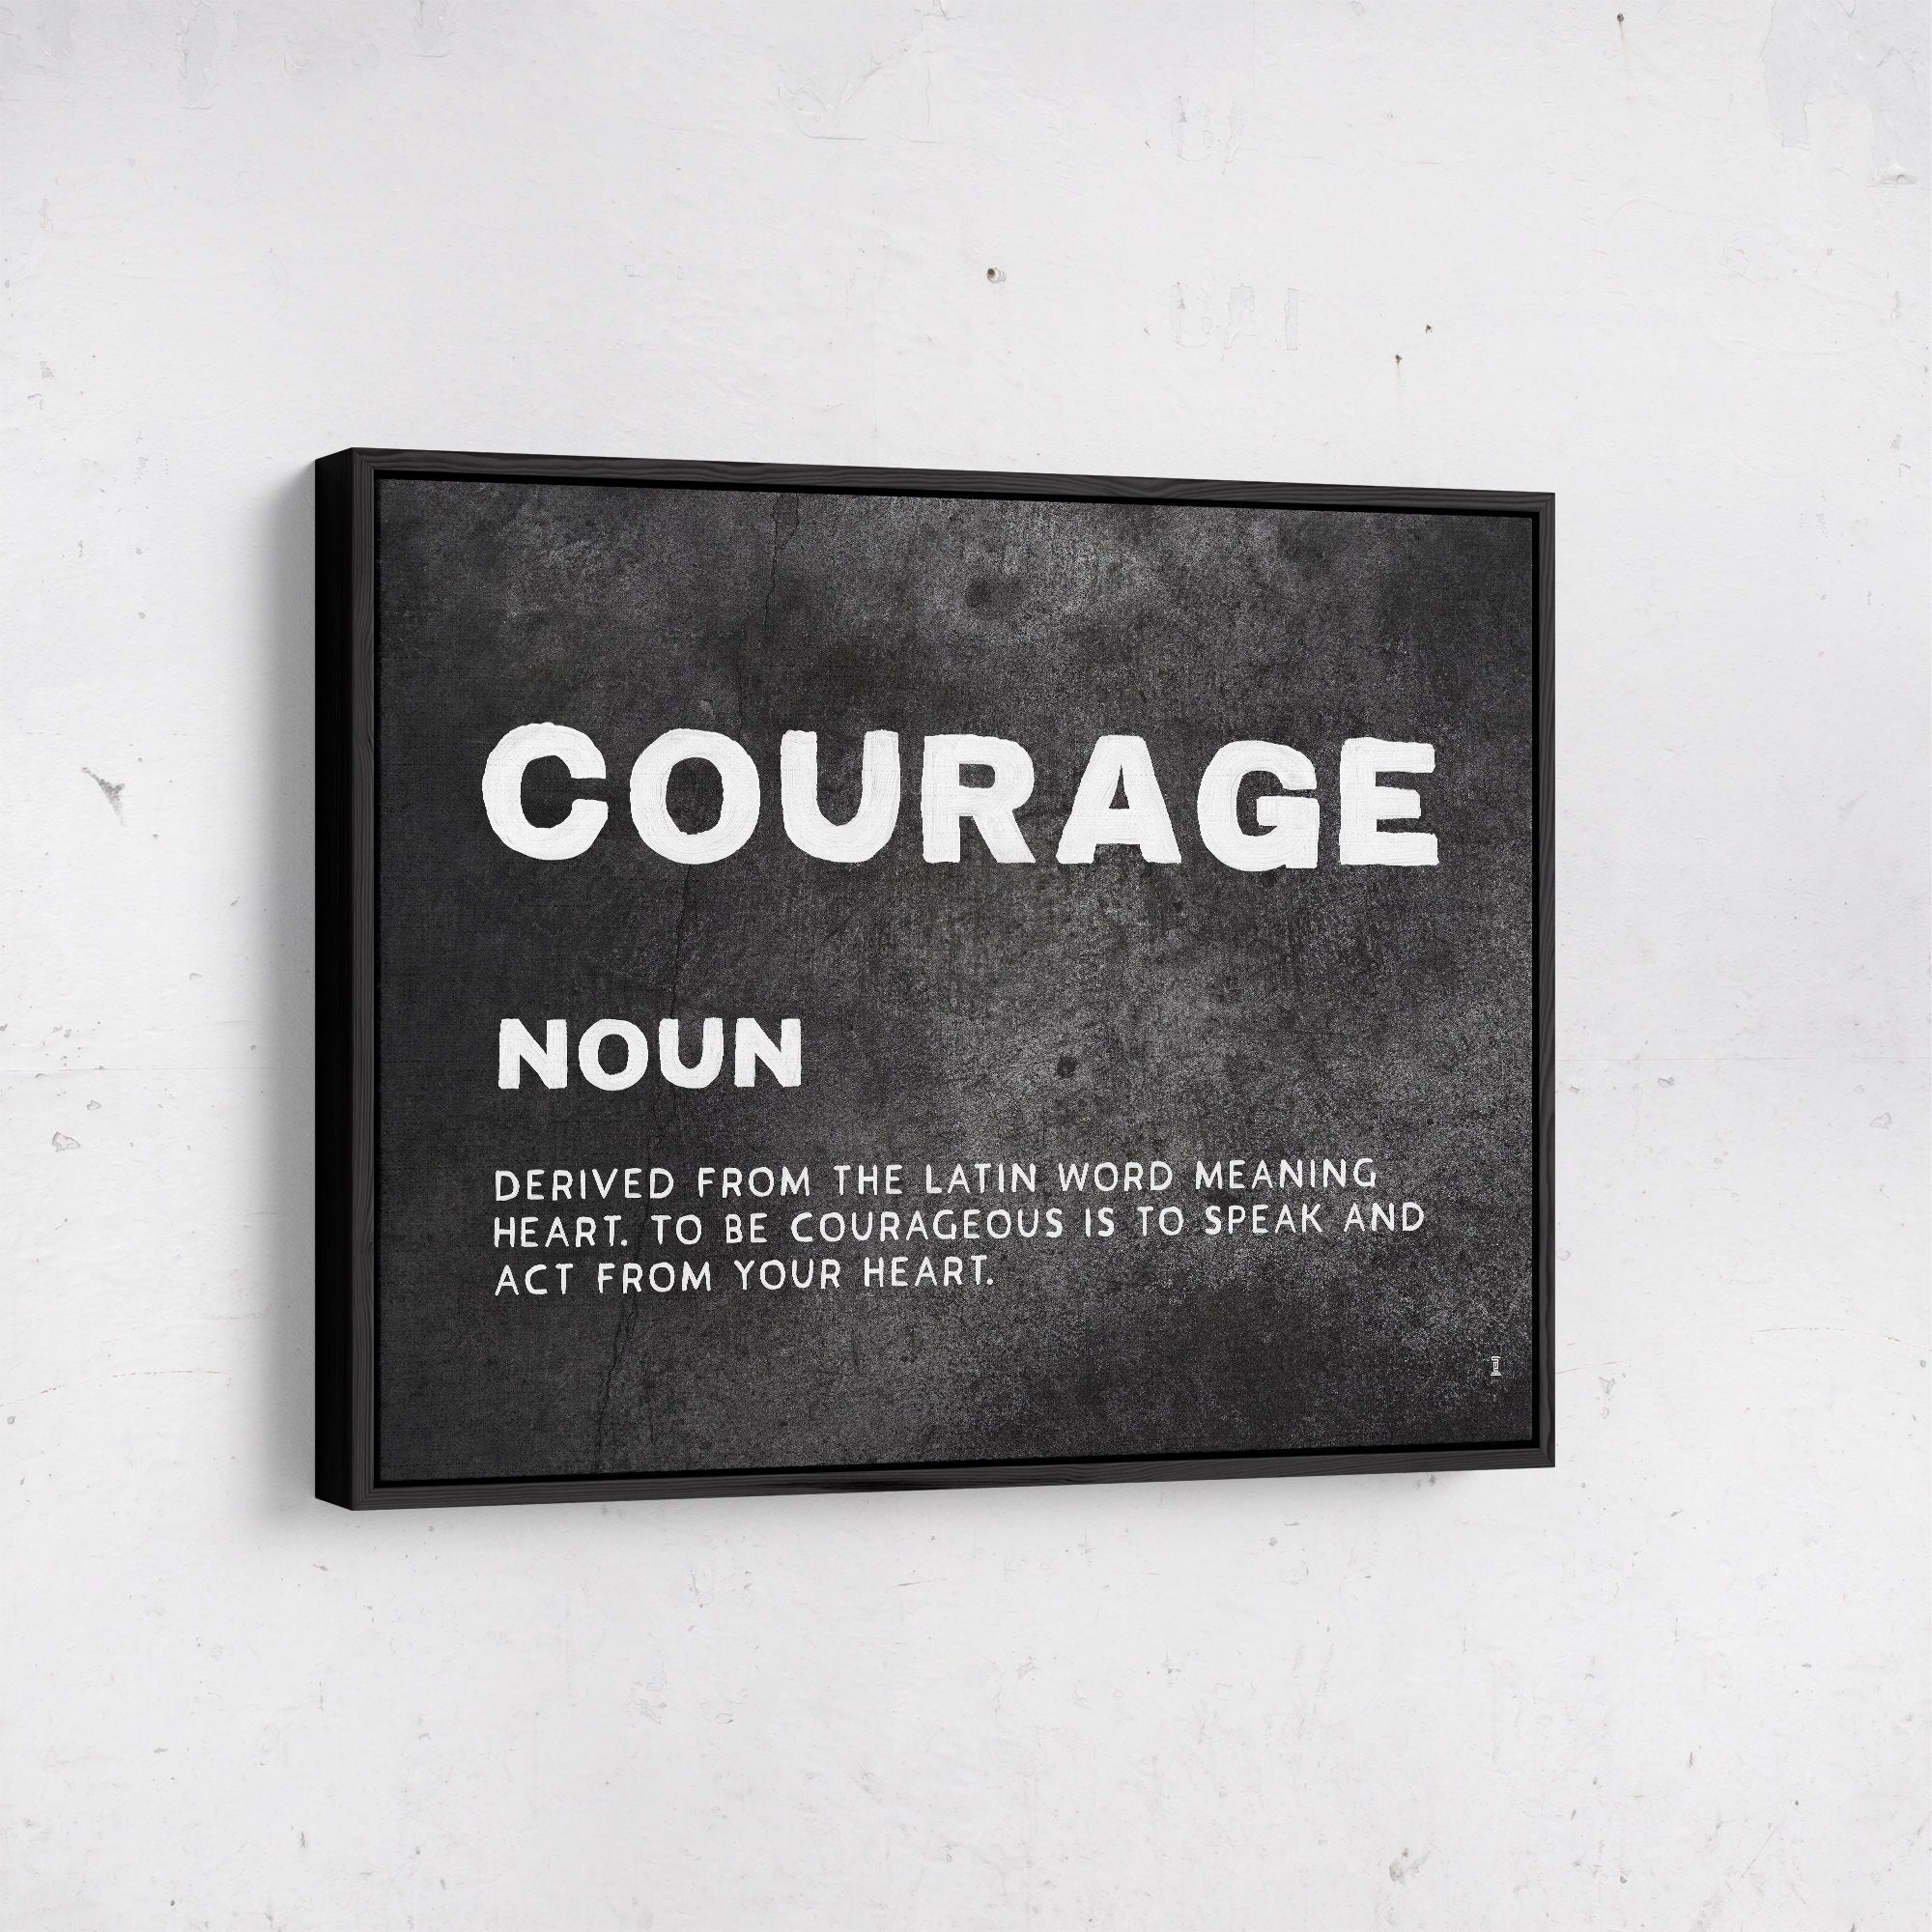 Courage Definition Inspirational Entrepreneur Art Motivational Painted  Canvas Wall Art. Stoic Philosophy for Home or Office -  Canada